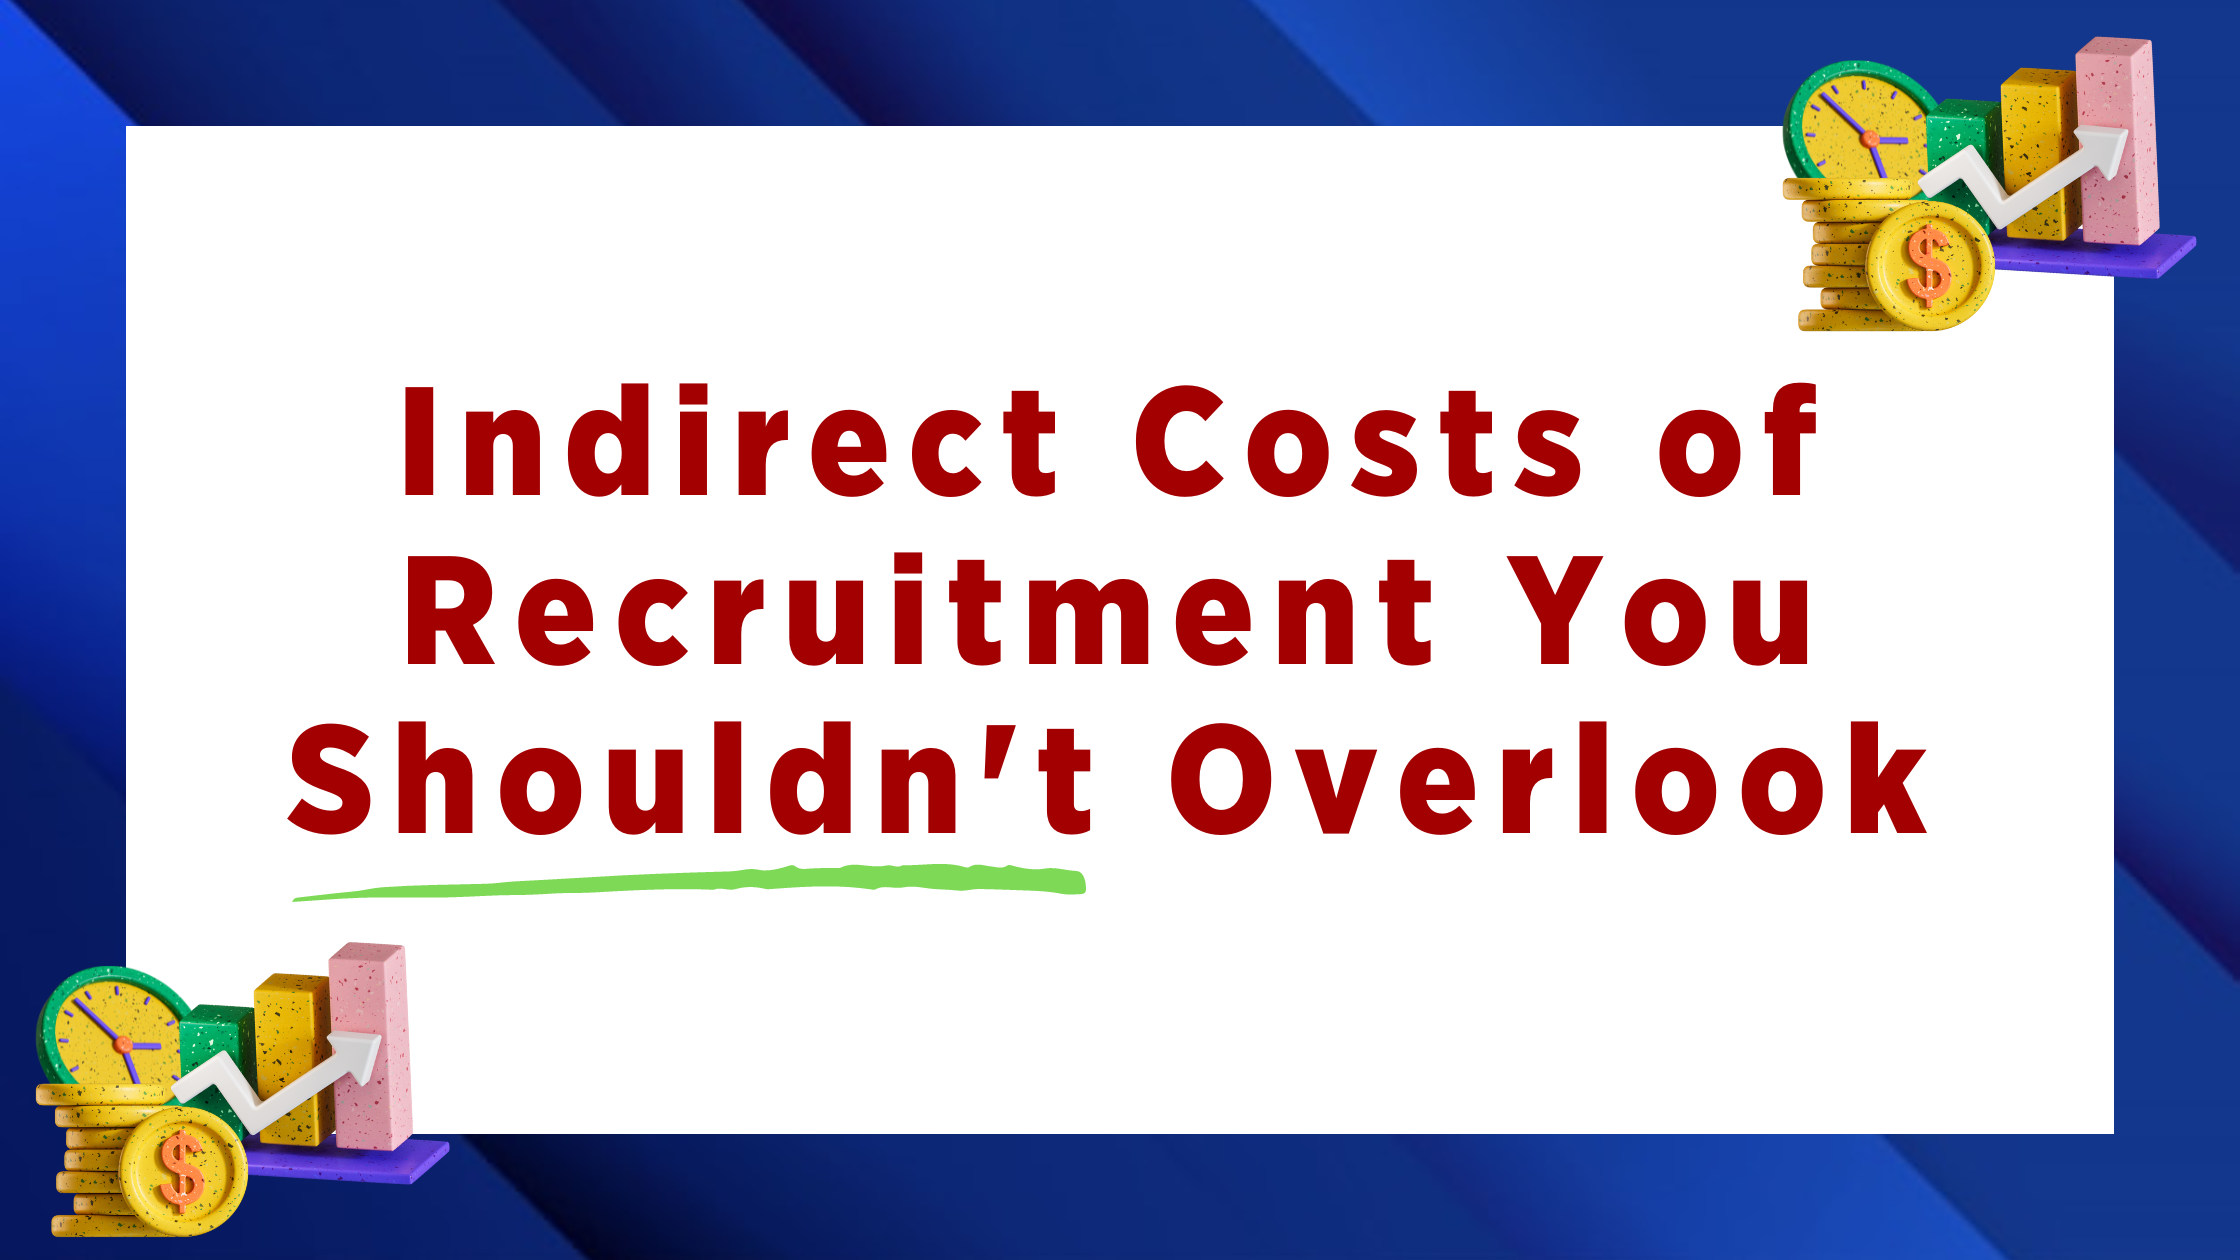 Recruitment Costs: Indirect